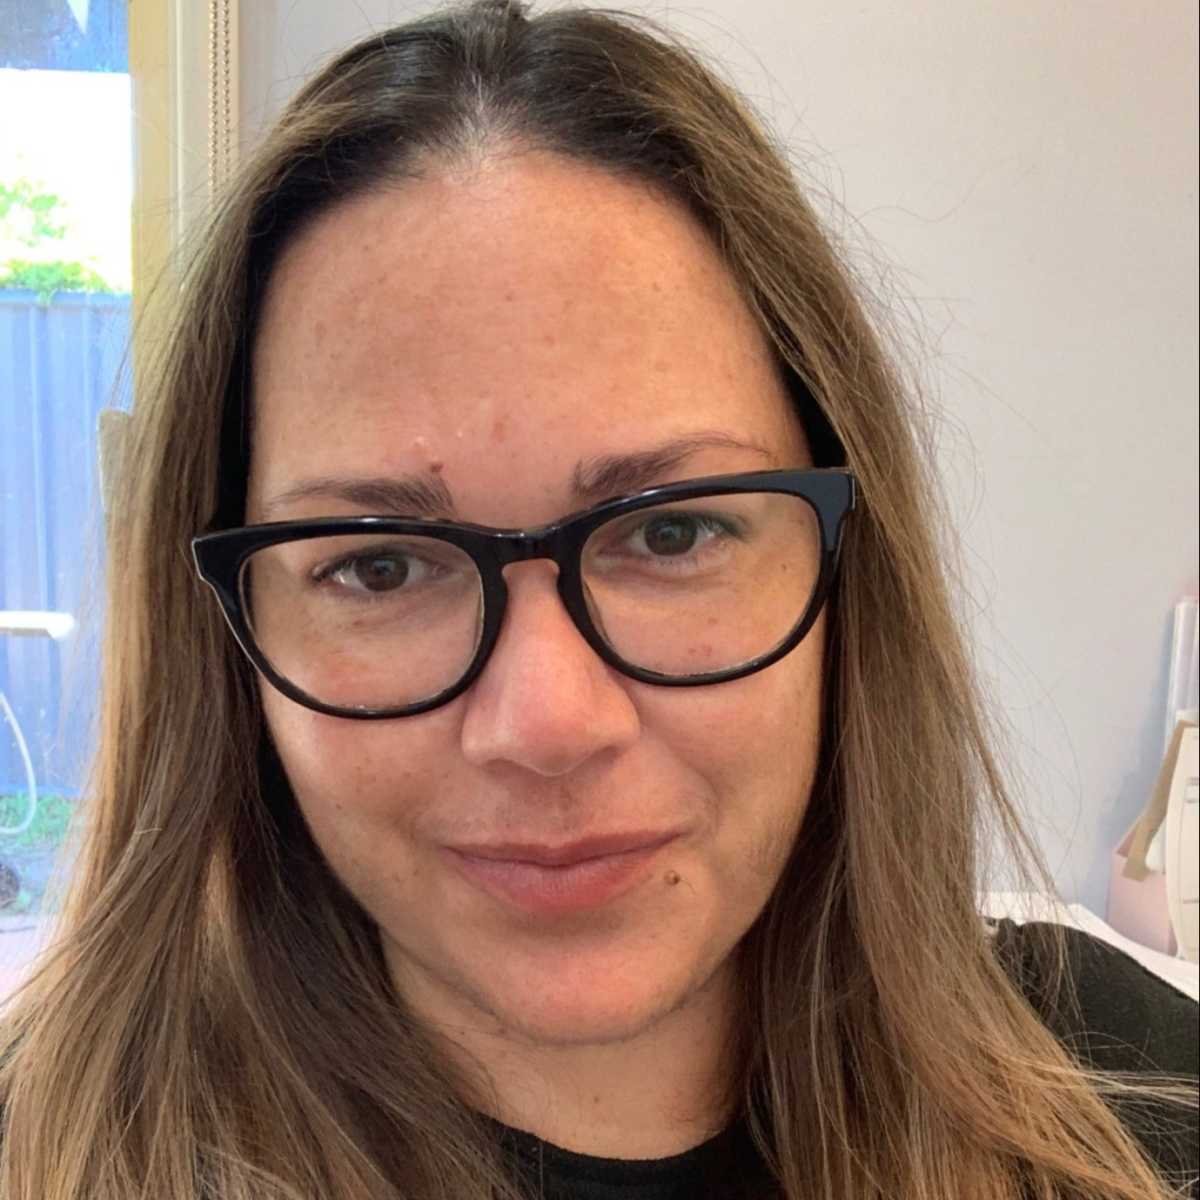 Close up of Shannon Mackie, Gumbaynggirr woman, State Manager Aboriginal & Torres Strait Islander, Cultural Support, Leadership & Governance. Shannon has long light brown hair and is wearing glasses and a black top.